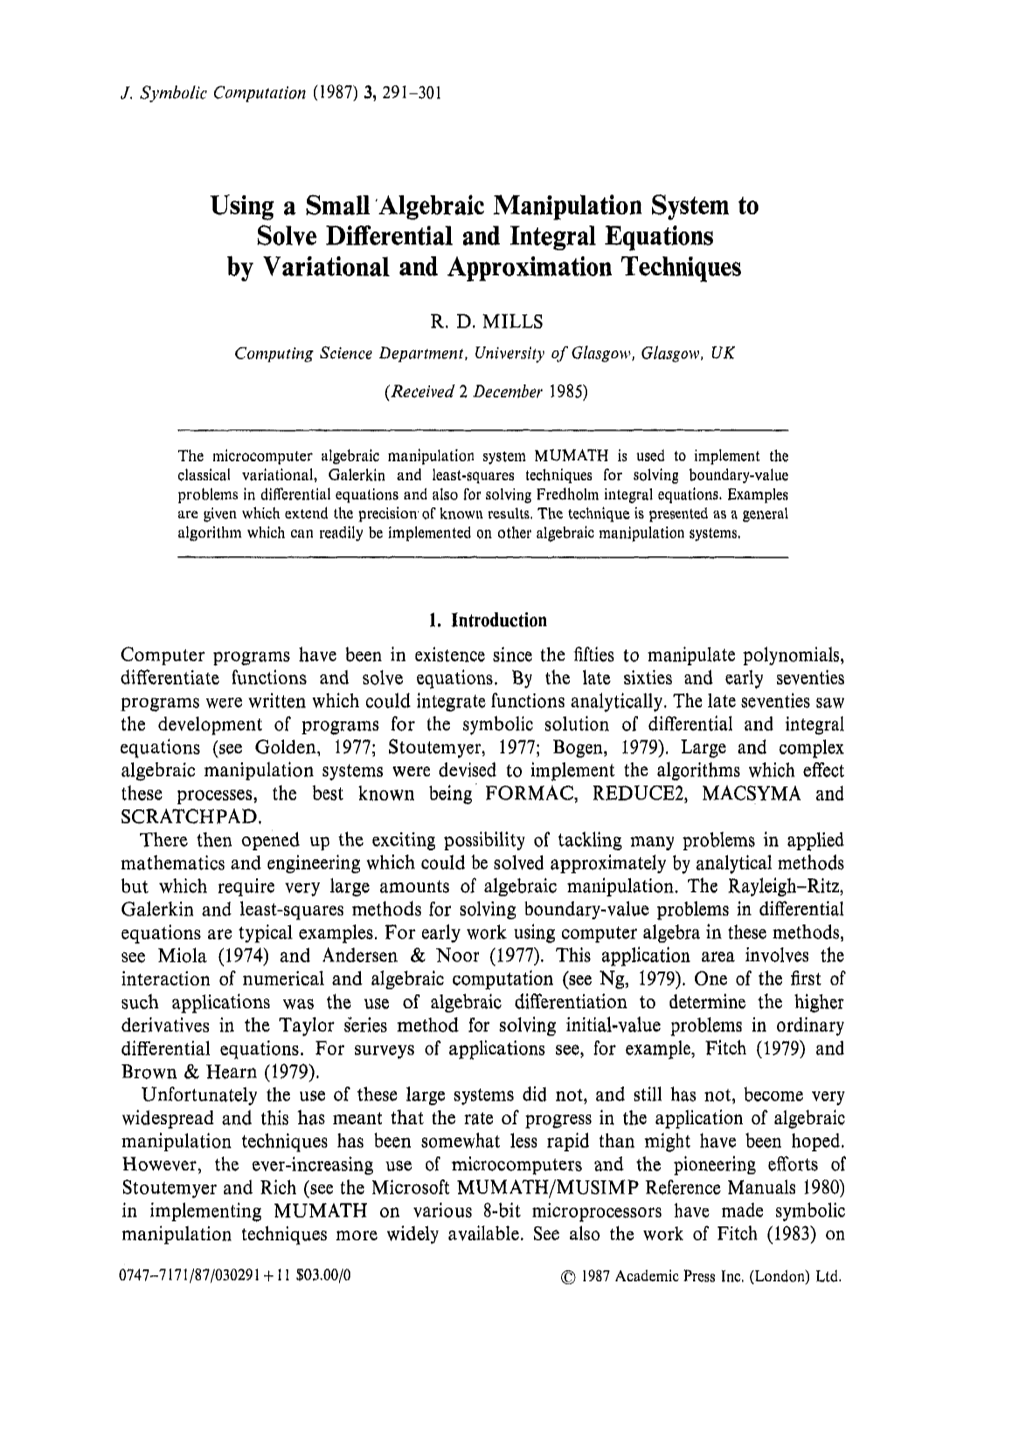 Using a Small Algebraic Manipulation System to Solve Differential and Integral Equations by Variational and Approximation Techniques